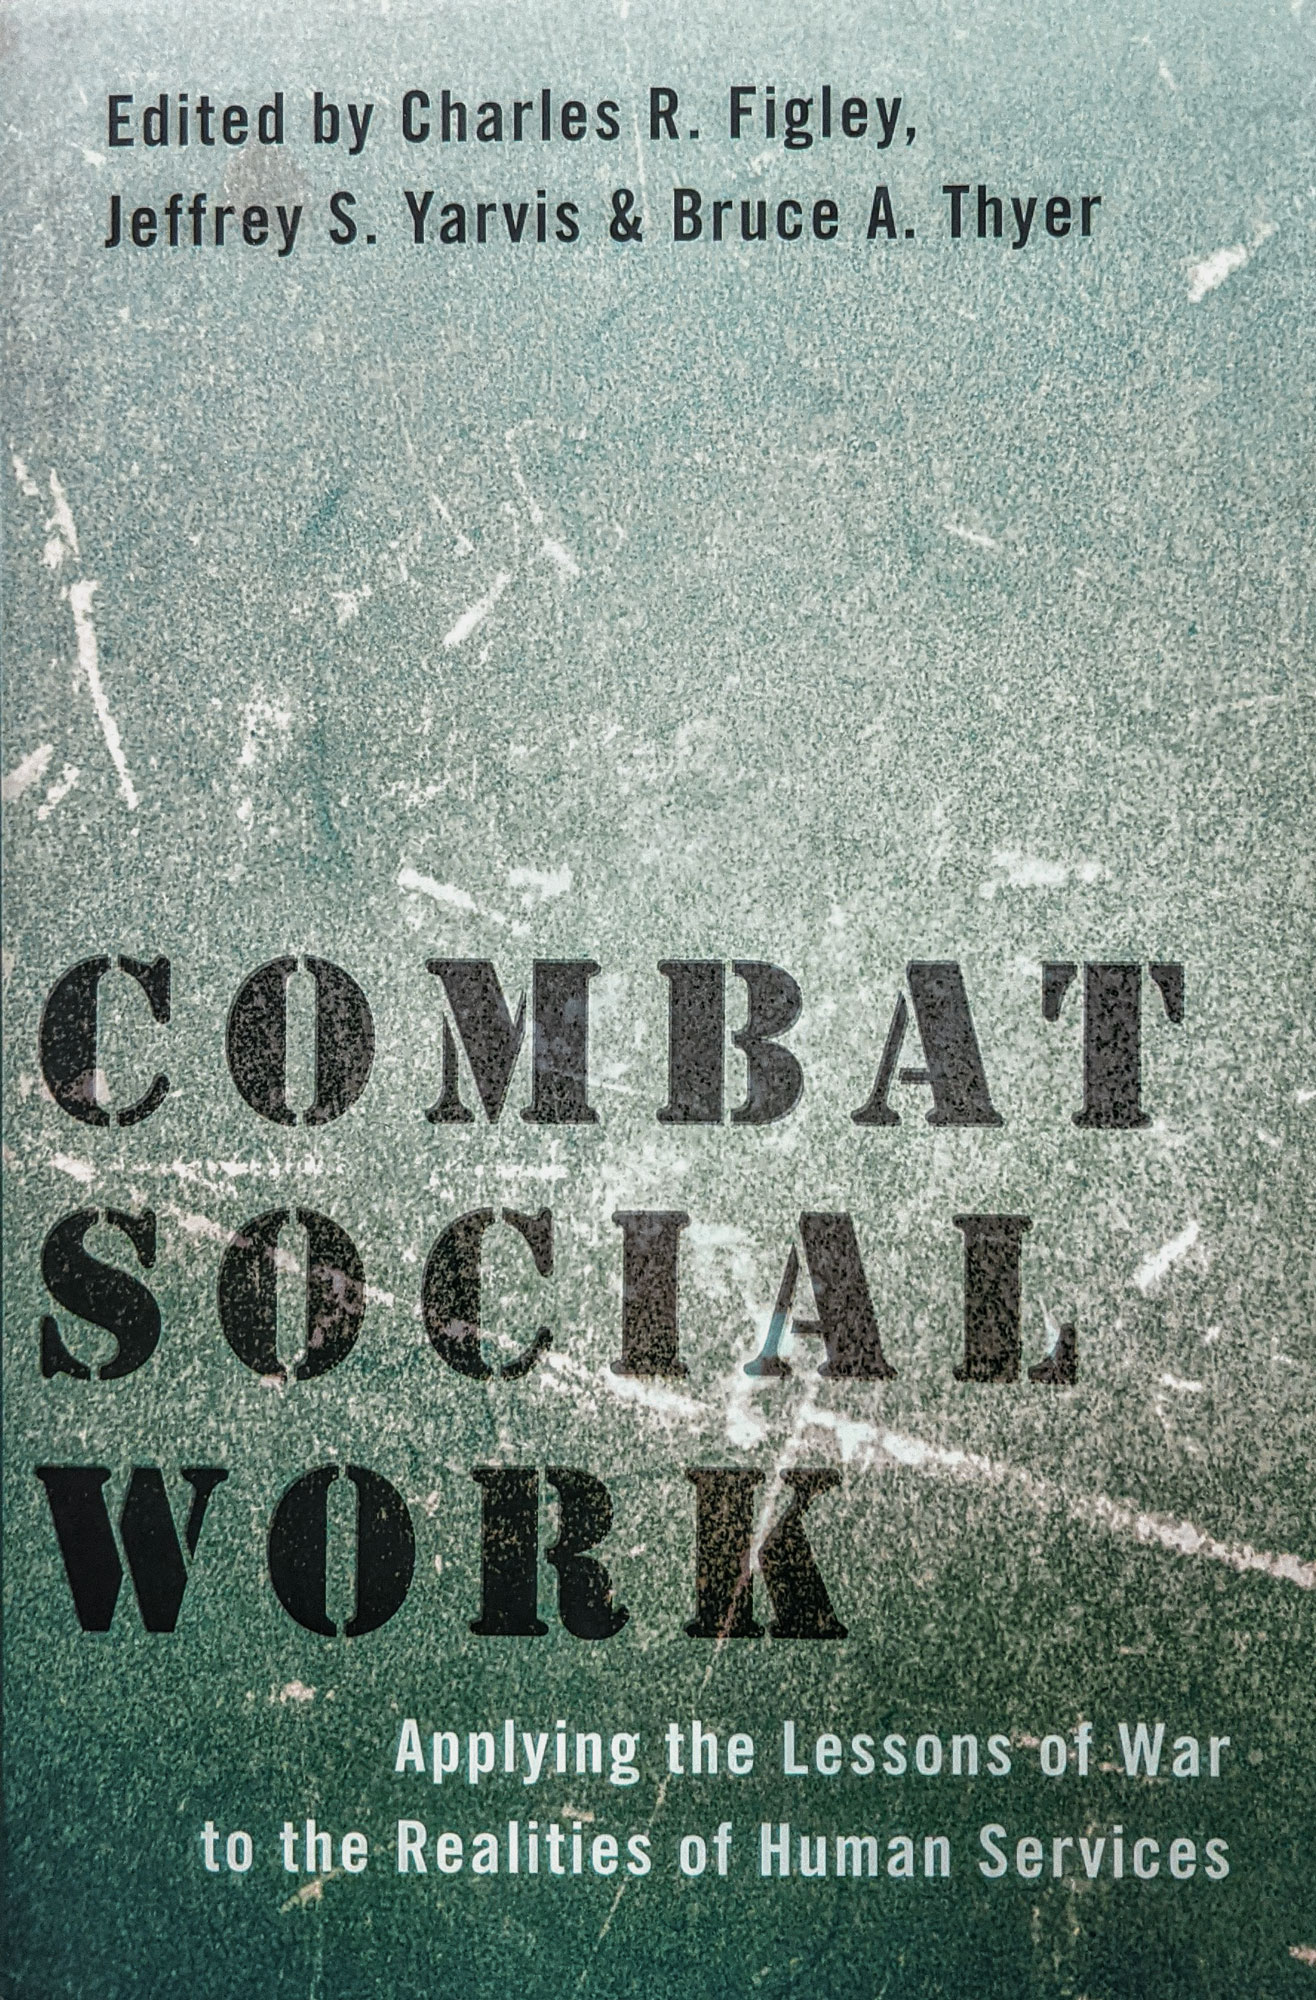 Combat Social Work by Figley, Yarvis, and Thyer